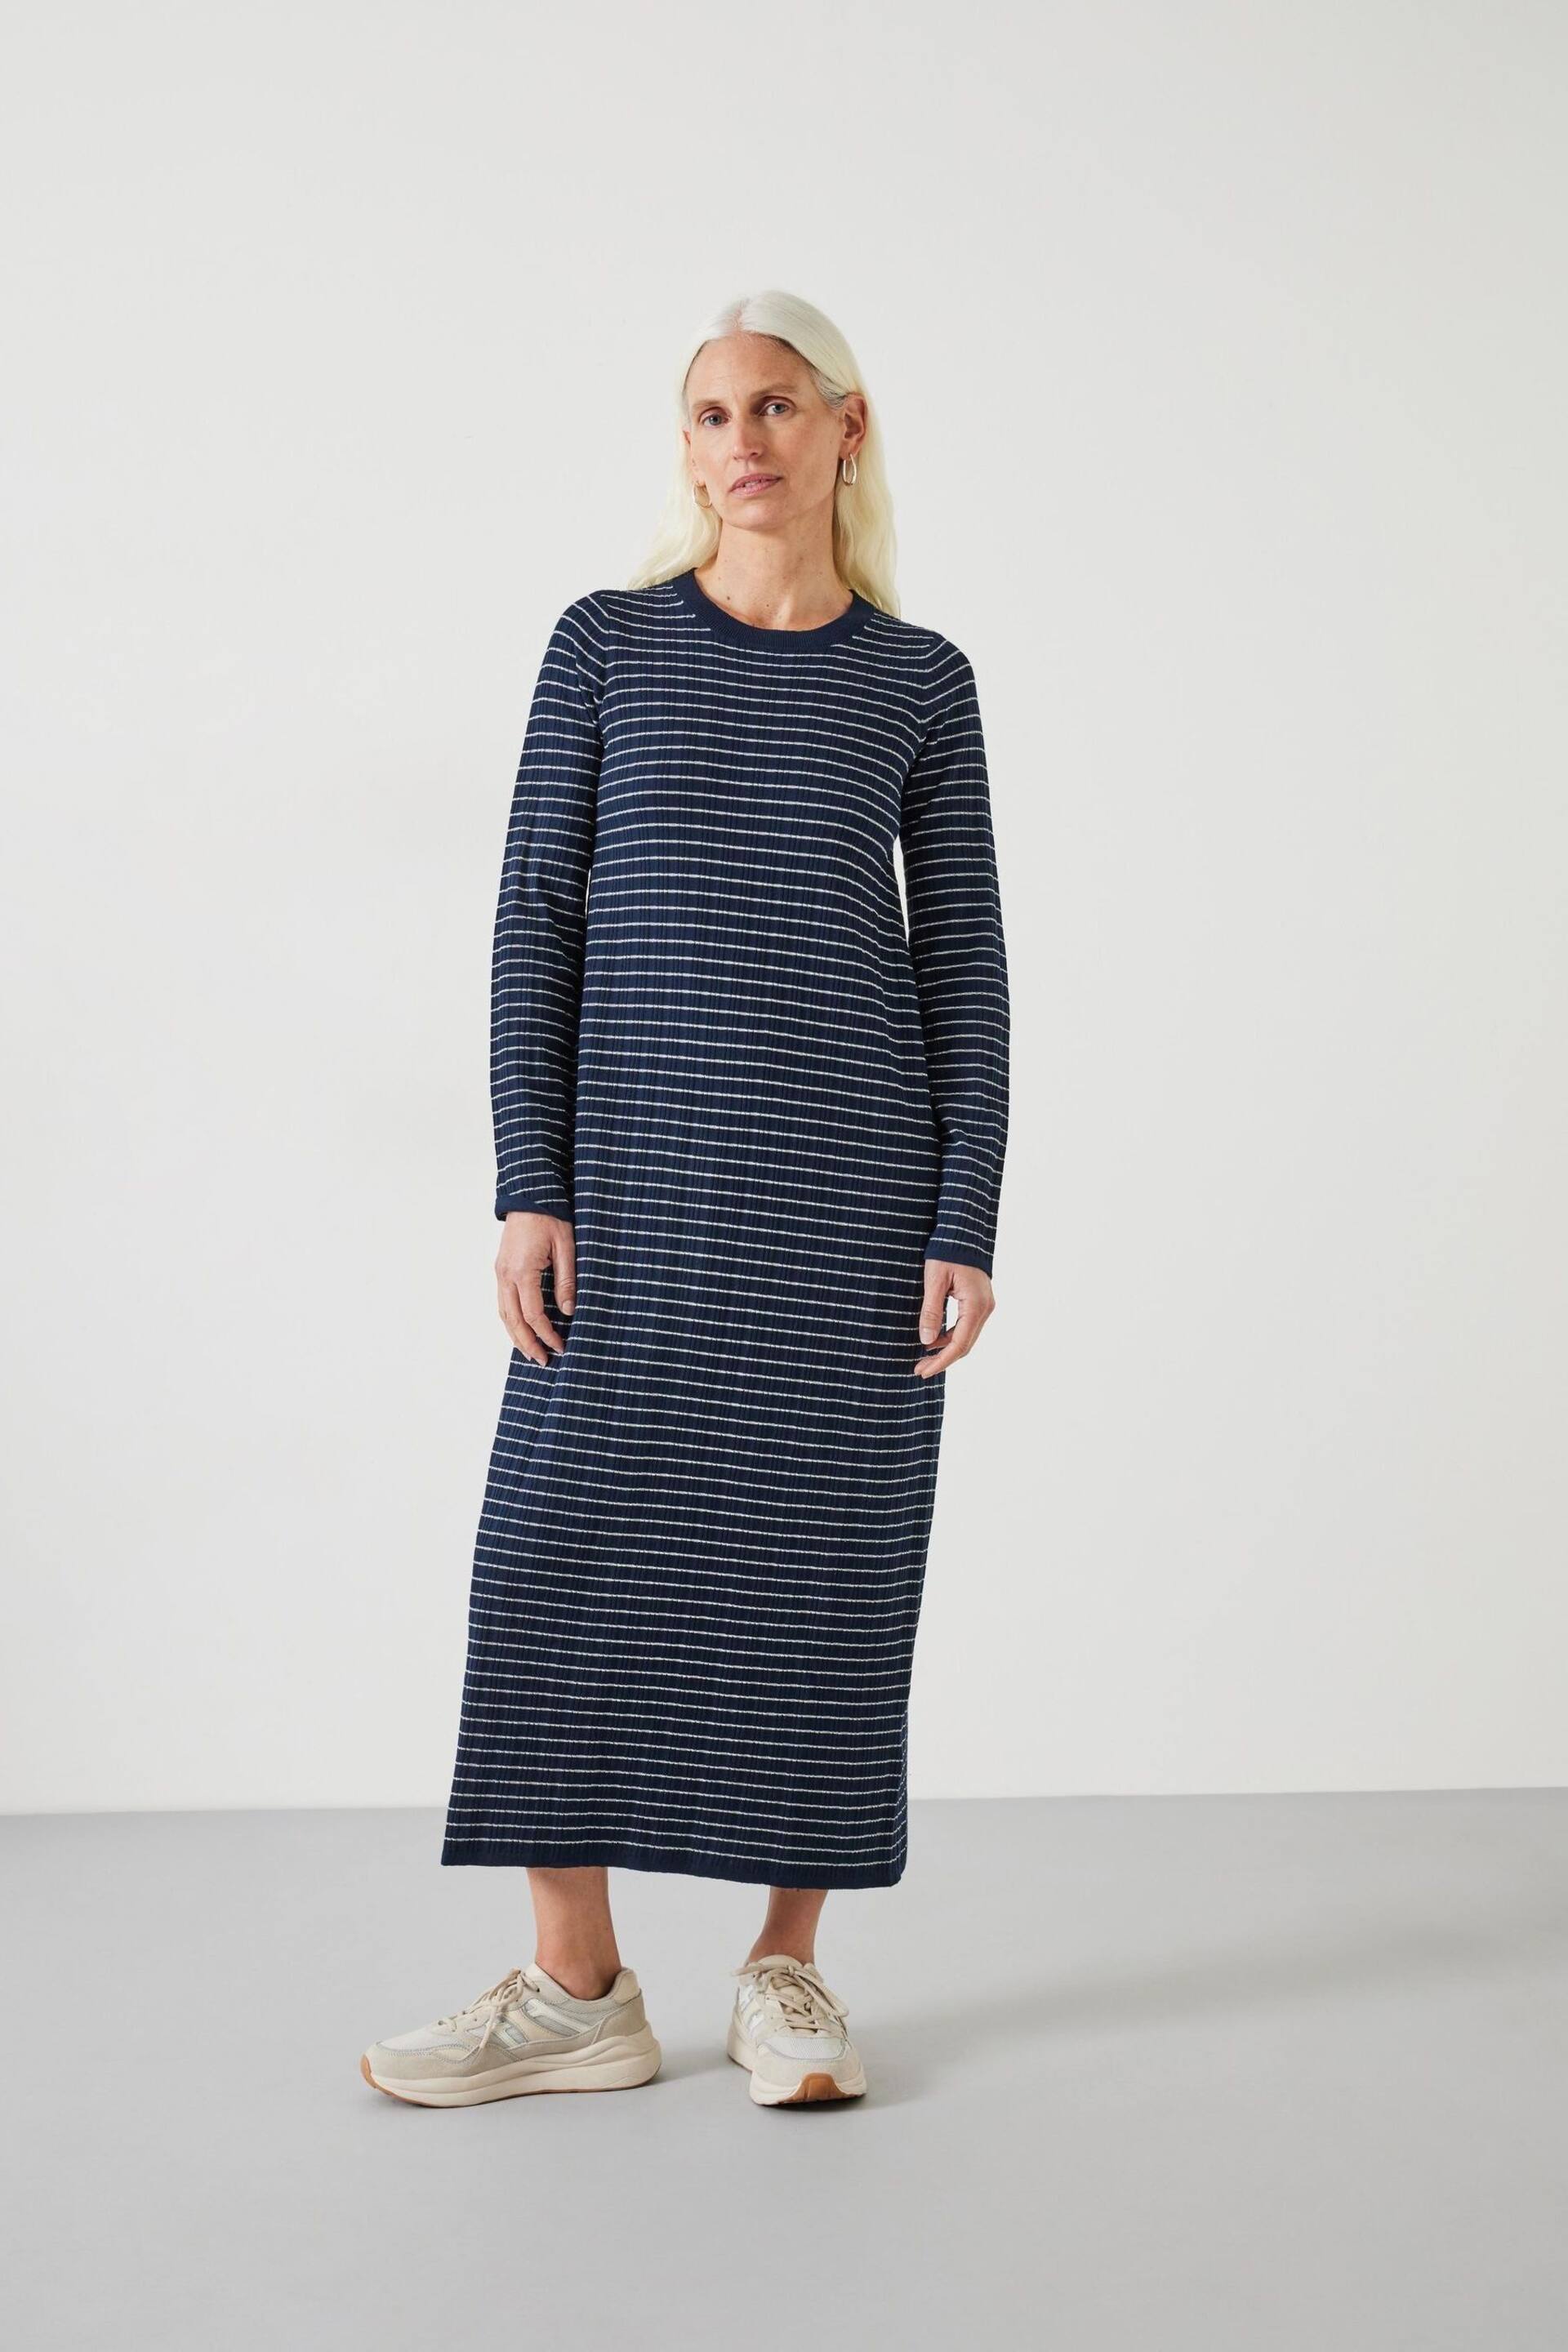 Hush Blue Dixie Striped Knitted Dress - Image 1 of 2